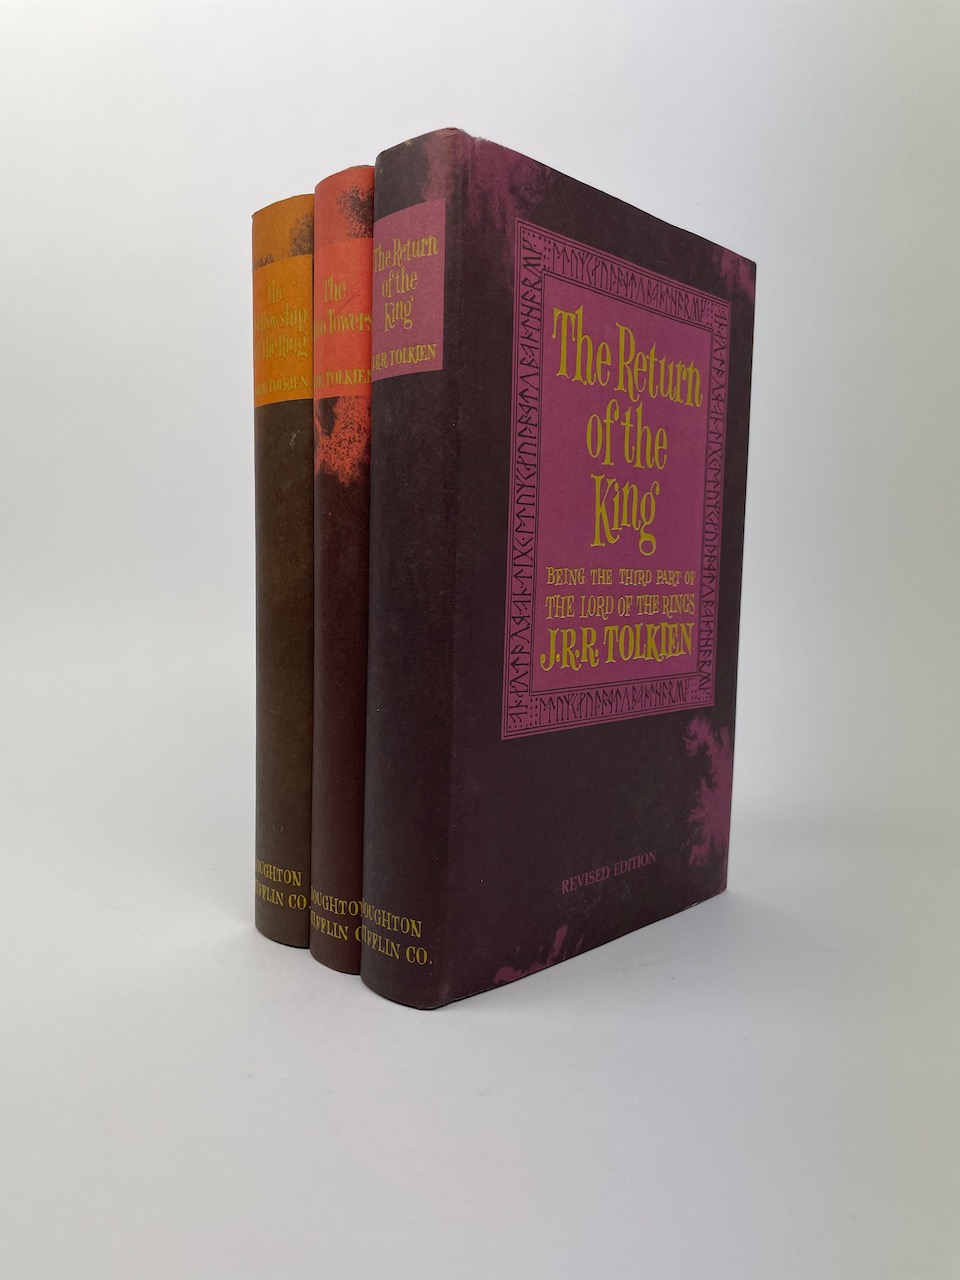 Lord of the Rings, 2nd US Edition in Original Publishers Slipcase and with Dustjackets 10